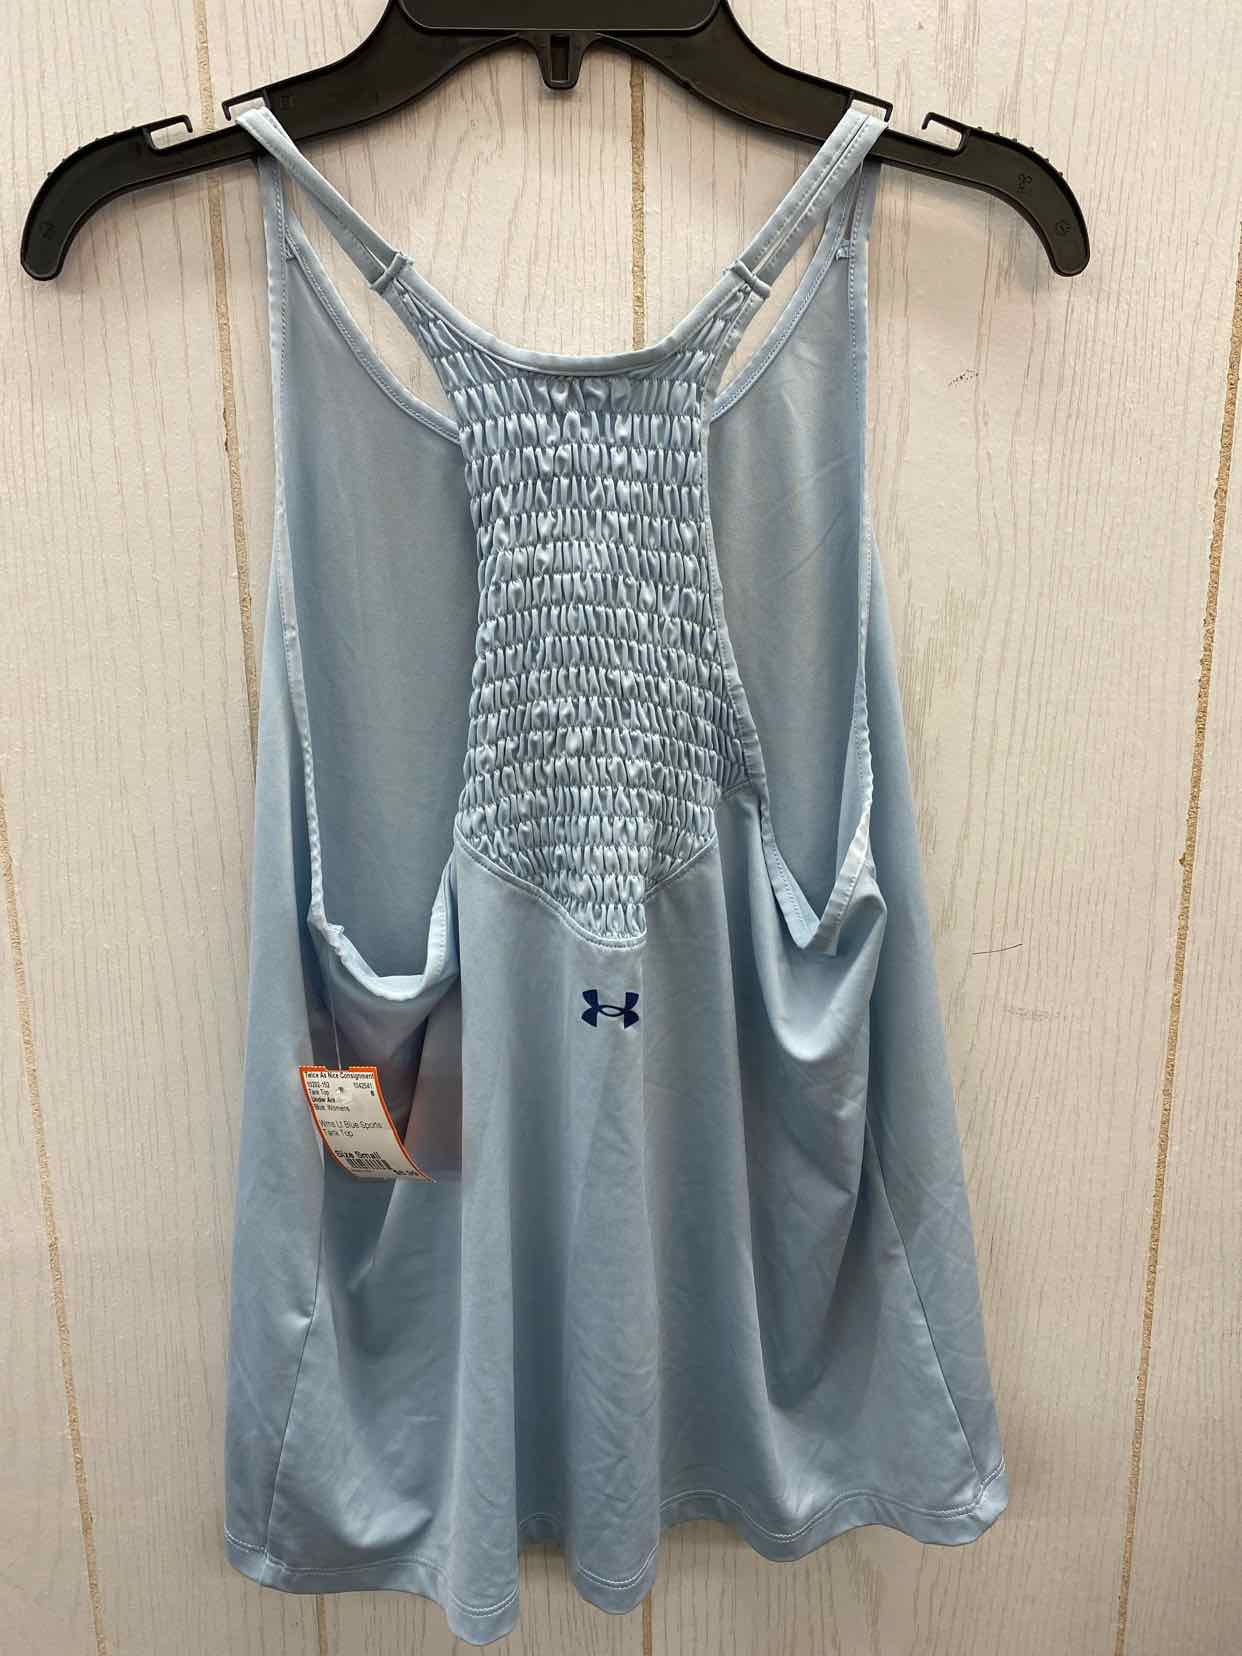 Under Armour Blue Womens Size Small Tank Top